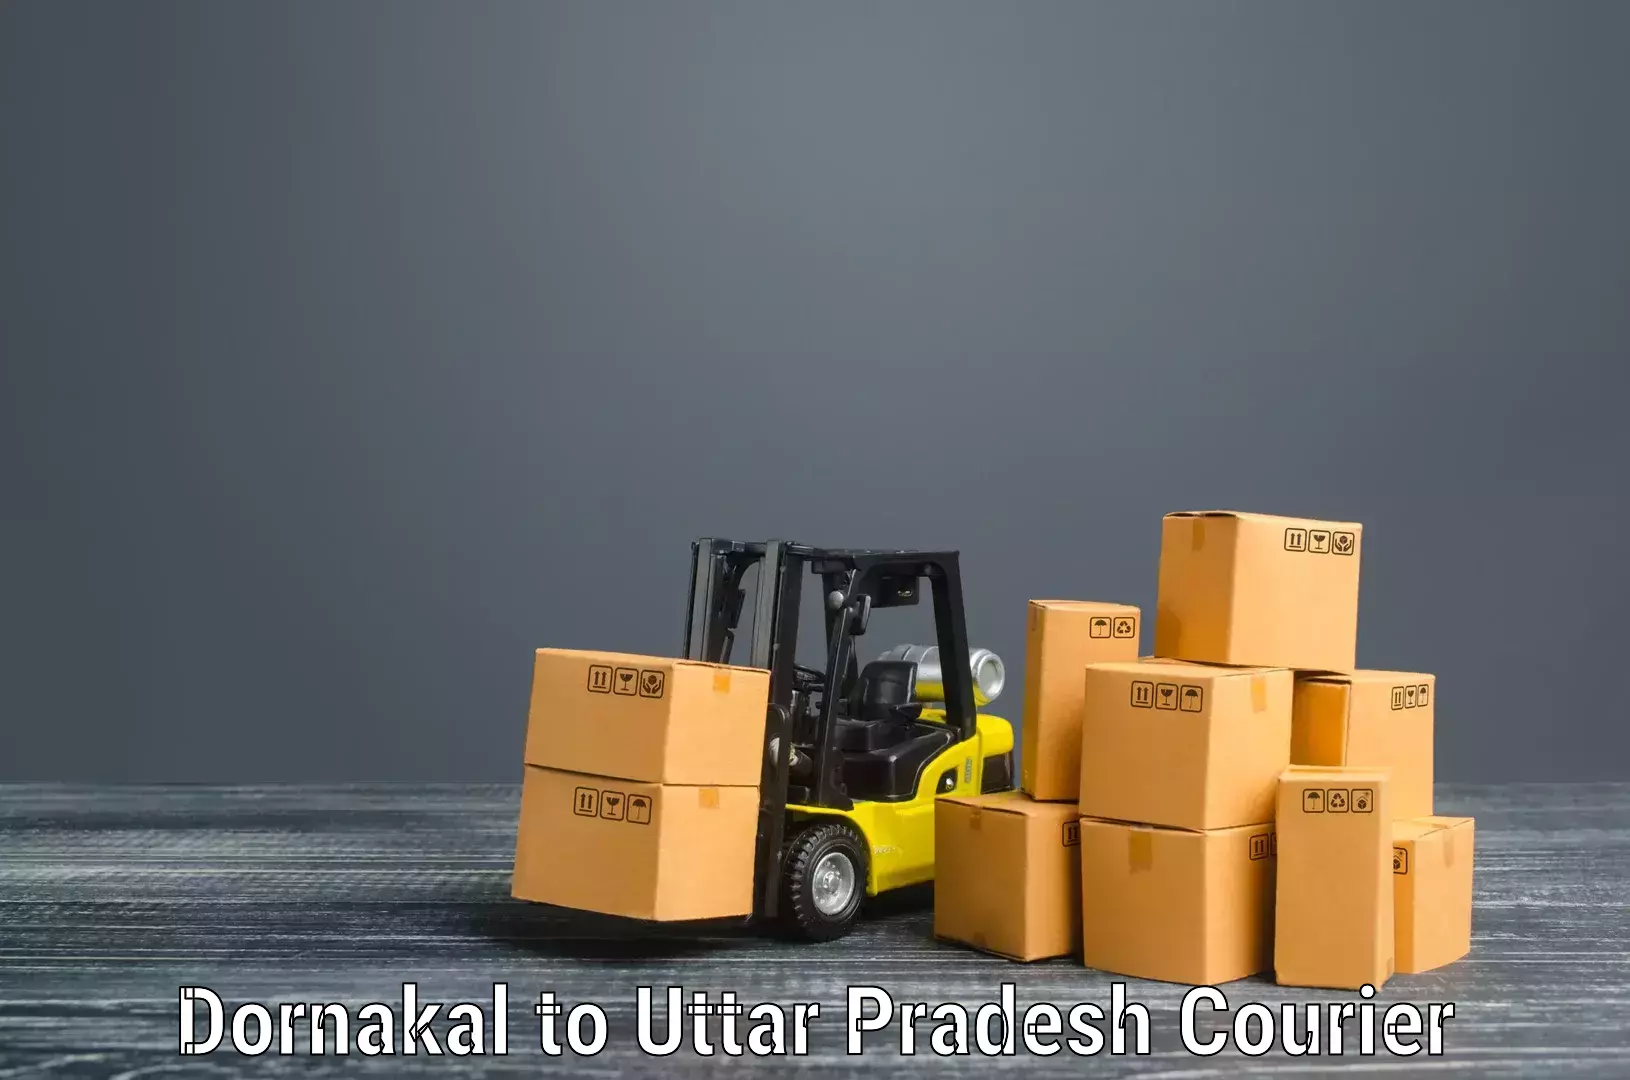 Hassle-free relocation in Dornakal to Pahasu